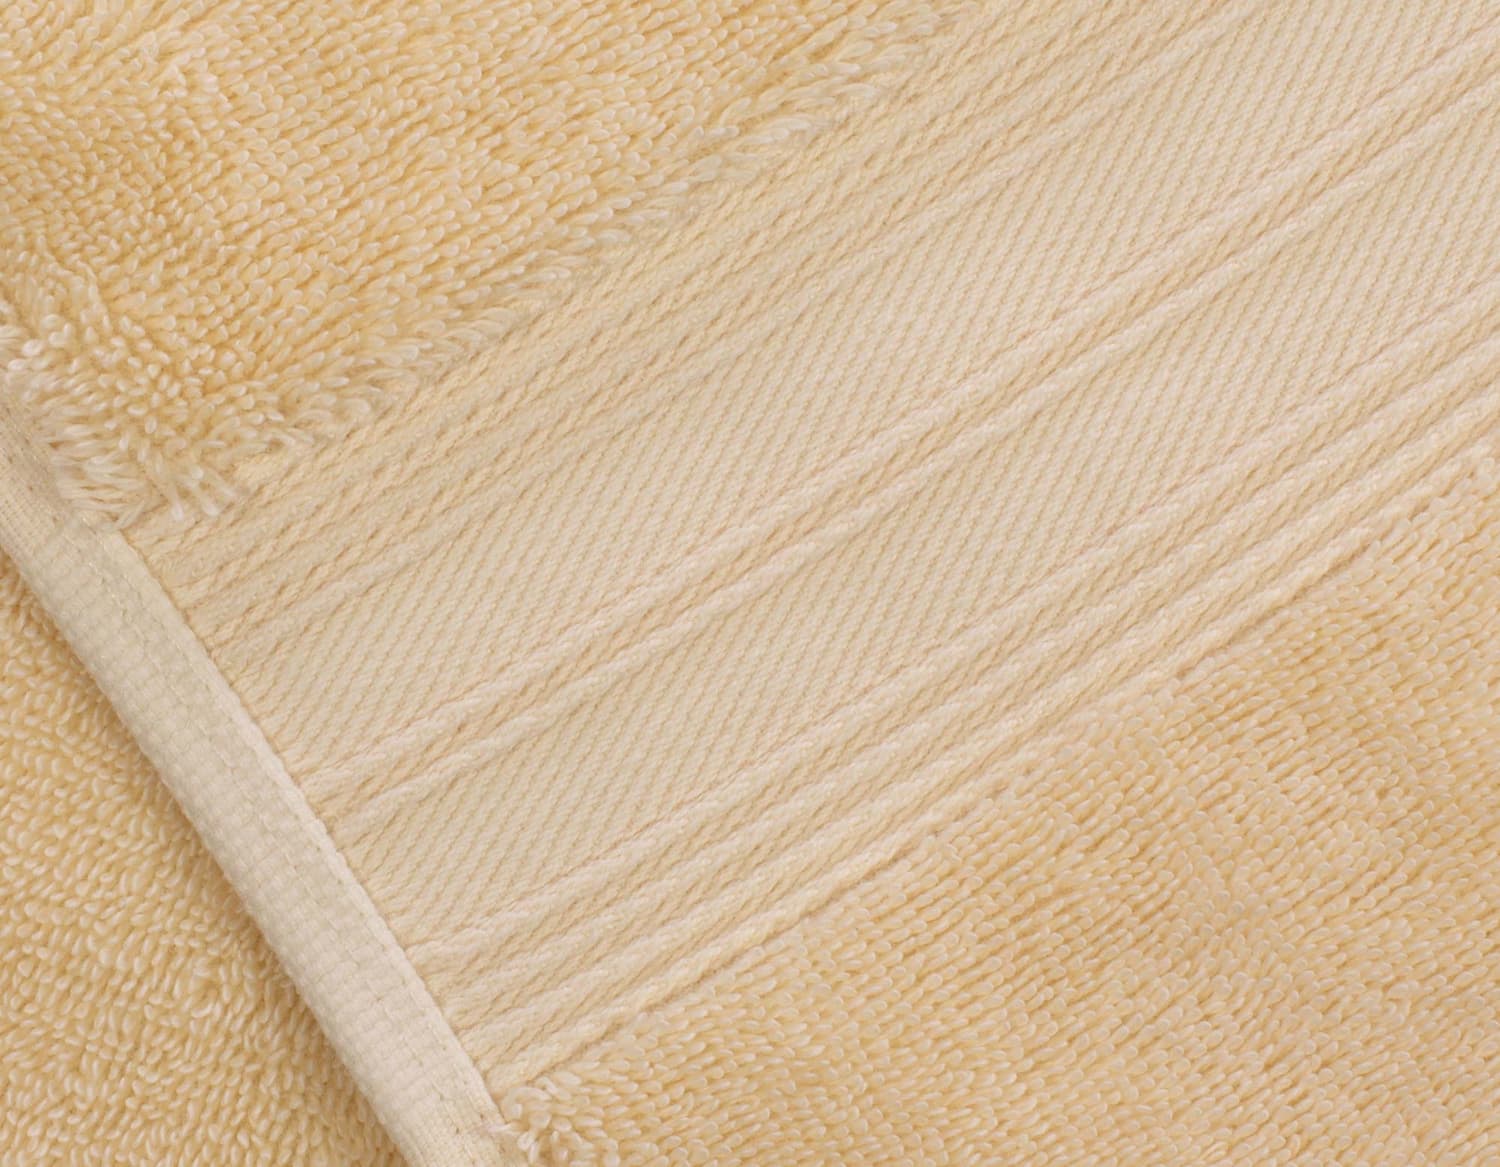 Creme Coloured Egyptian Cotton Hand Towel Showing Edging and Details